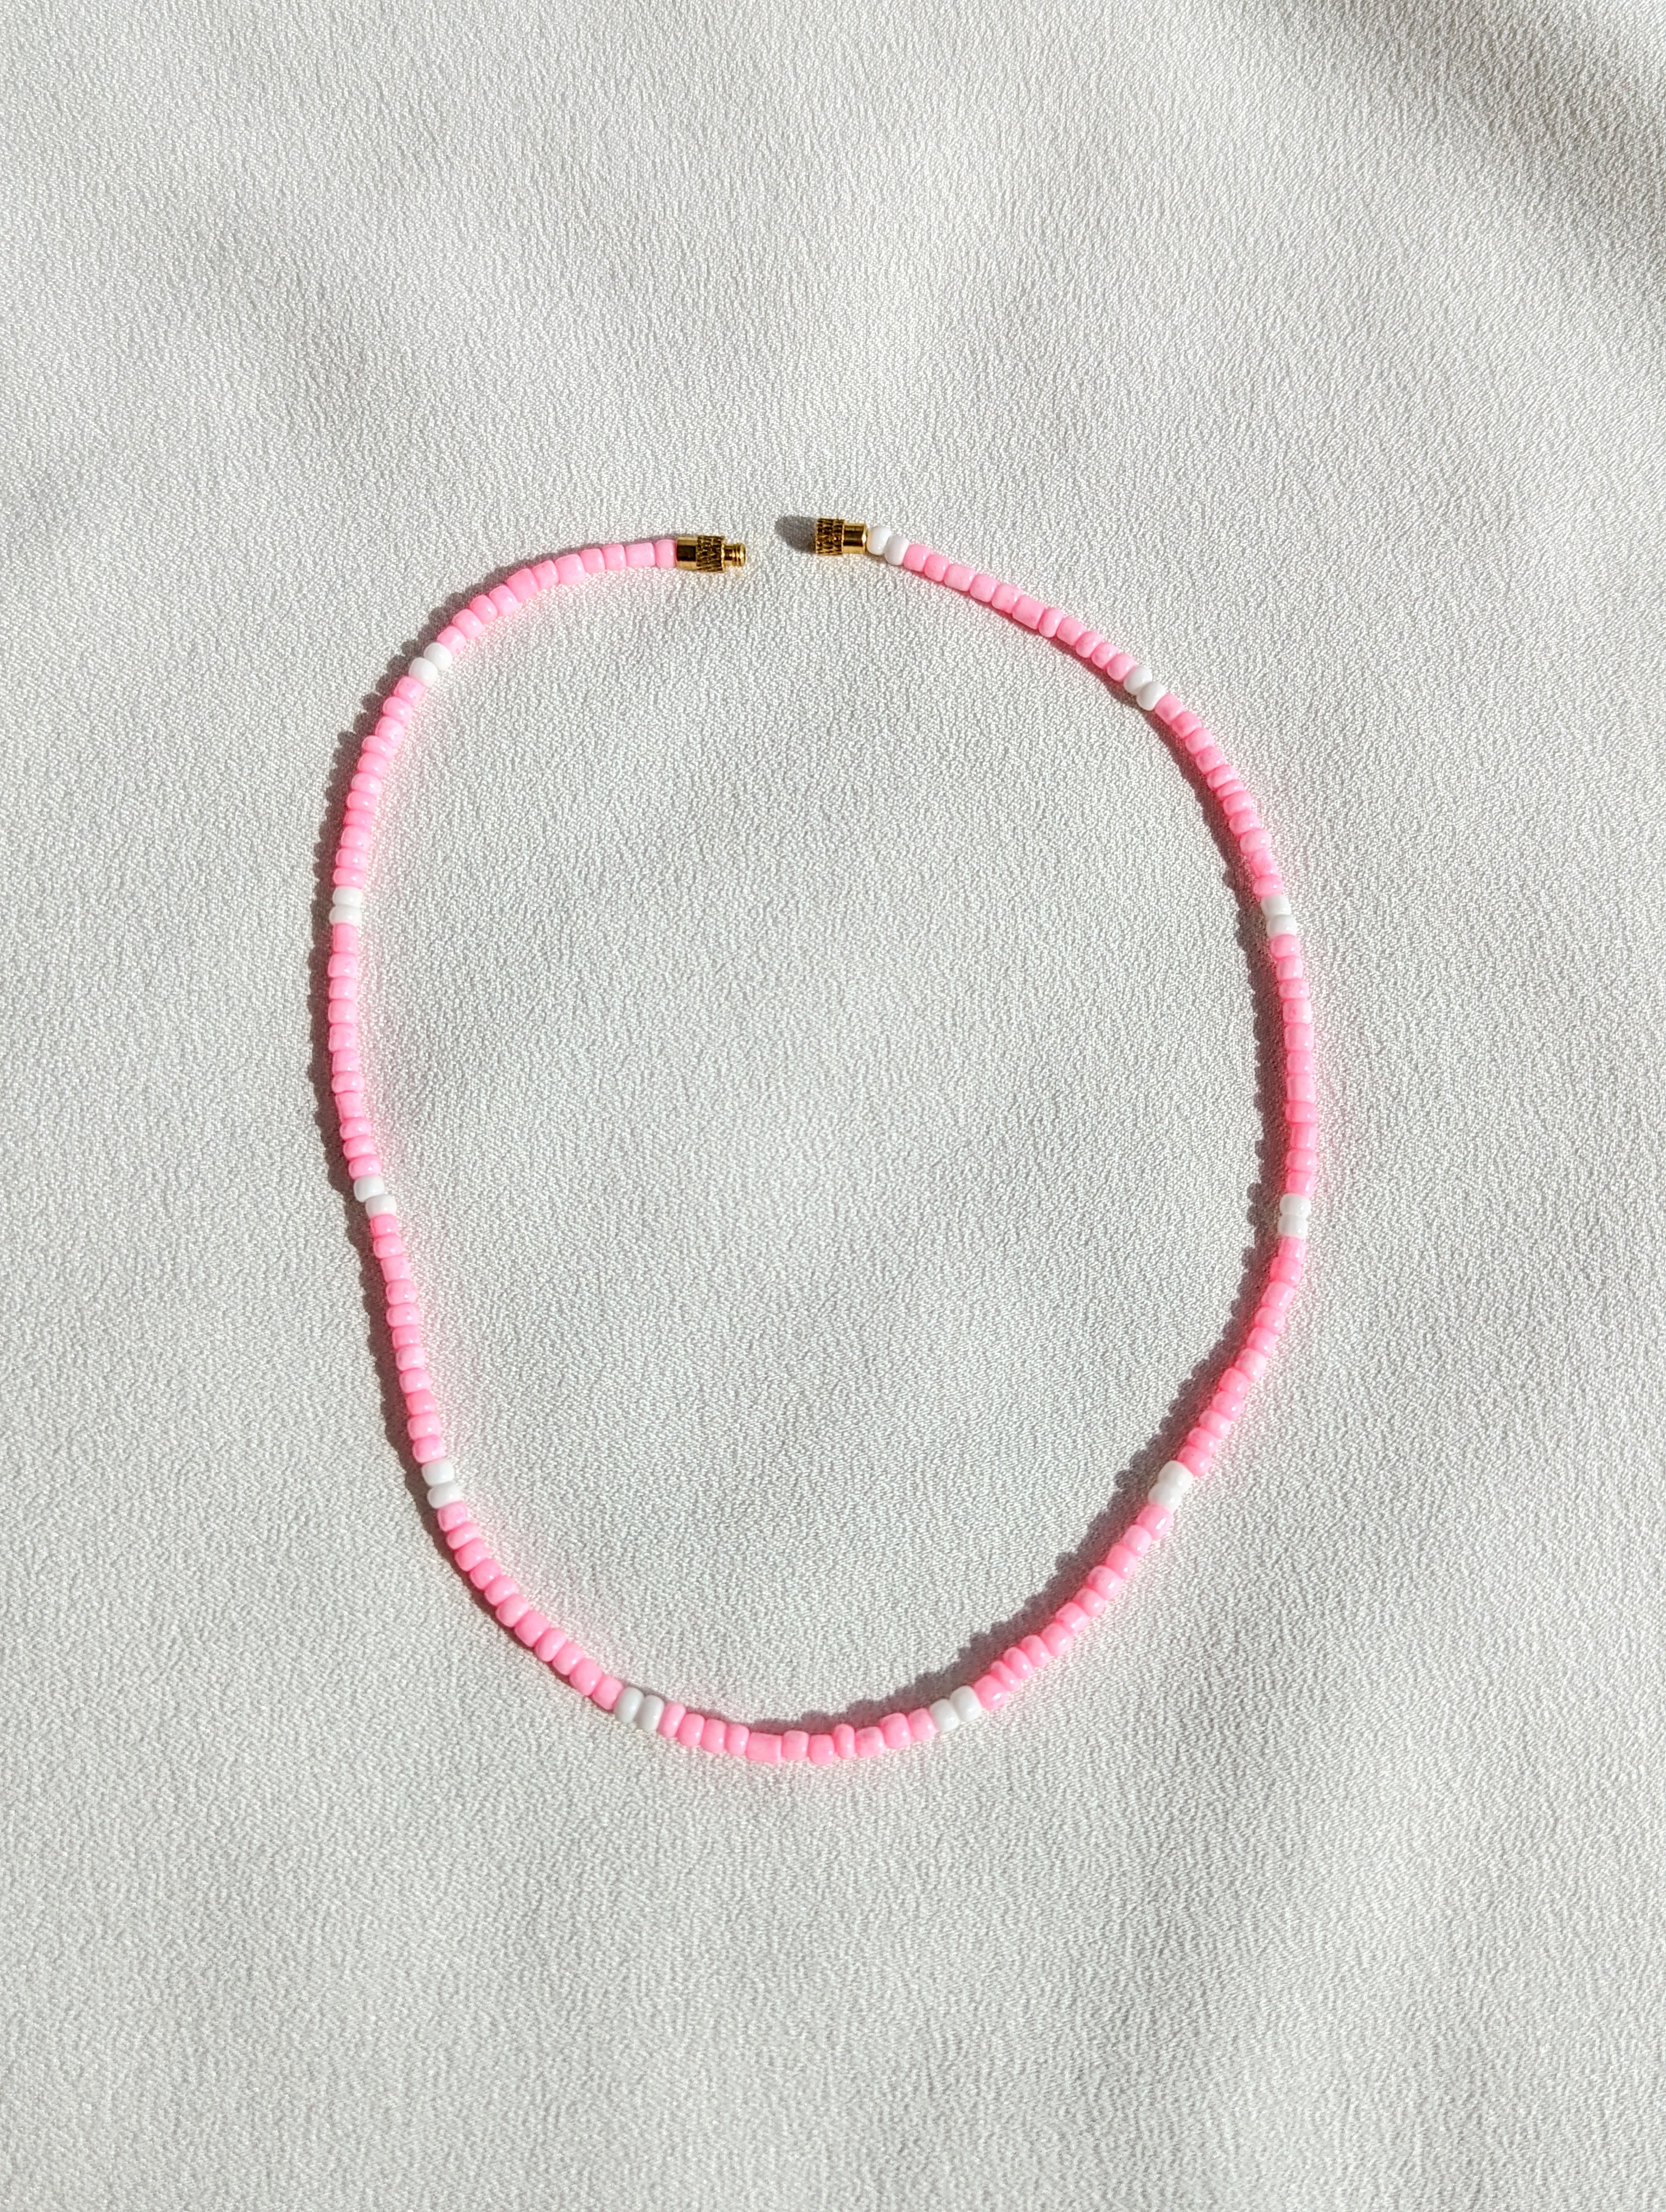 [THE ELEVEN] Necklace: Pink/White [Small Beads]